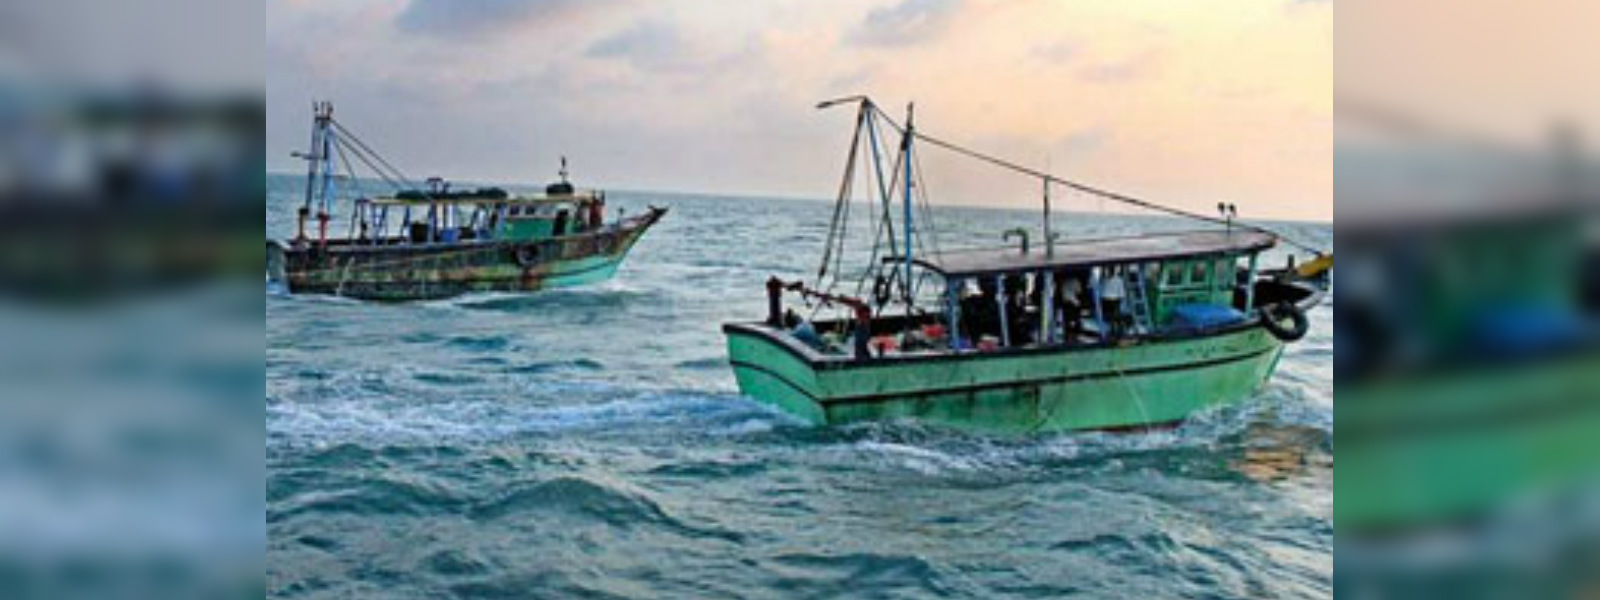 Fishing vessel with 5 onboard goes missing